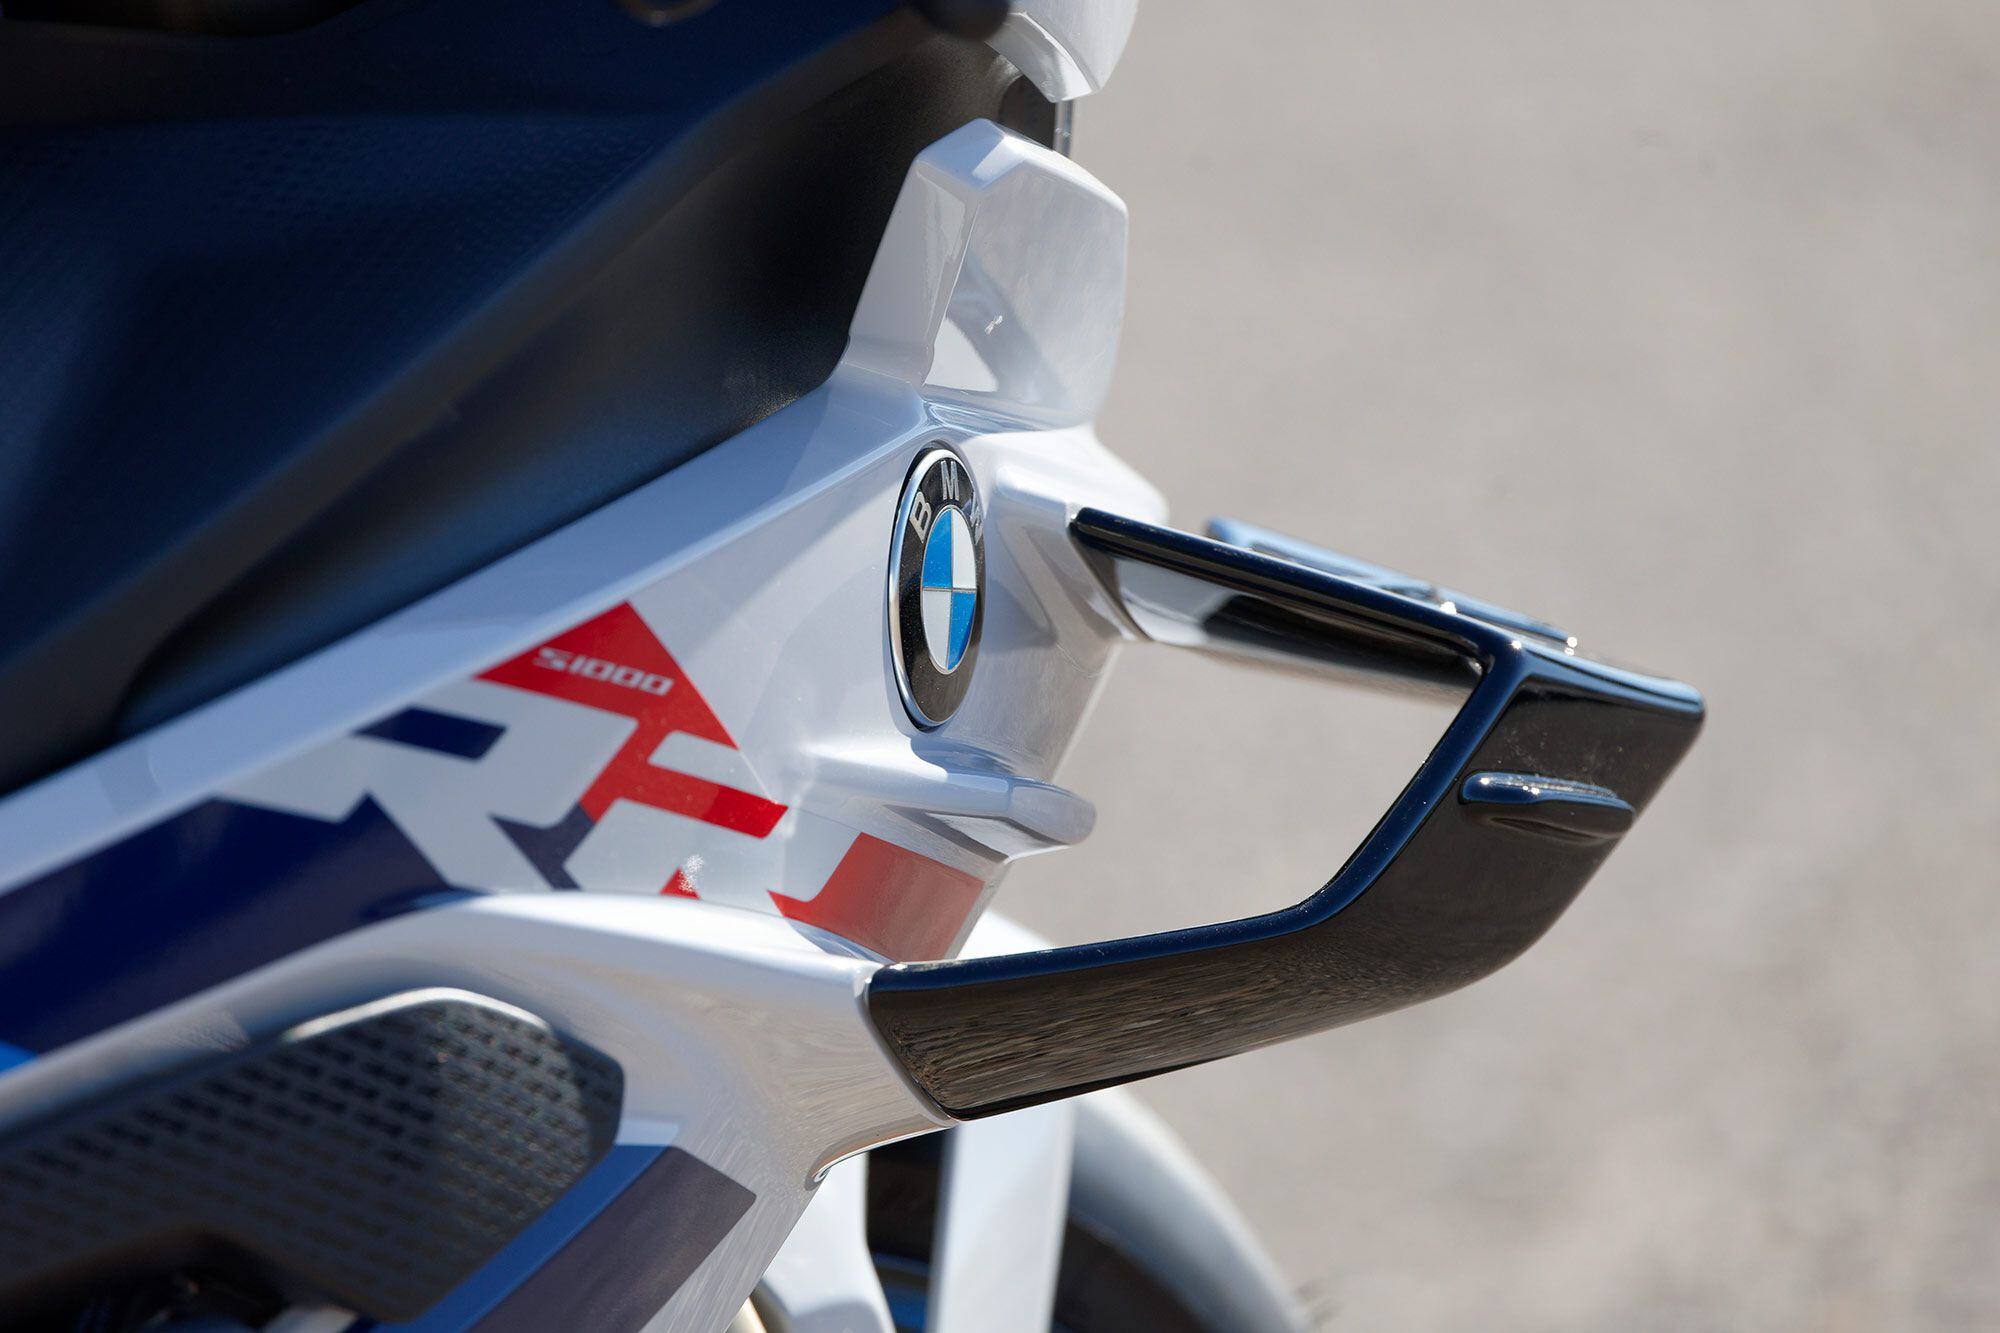 M 1000 RR–inspired winglets are part of the S model’s advanced aerodynamics package.